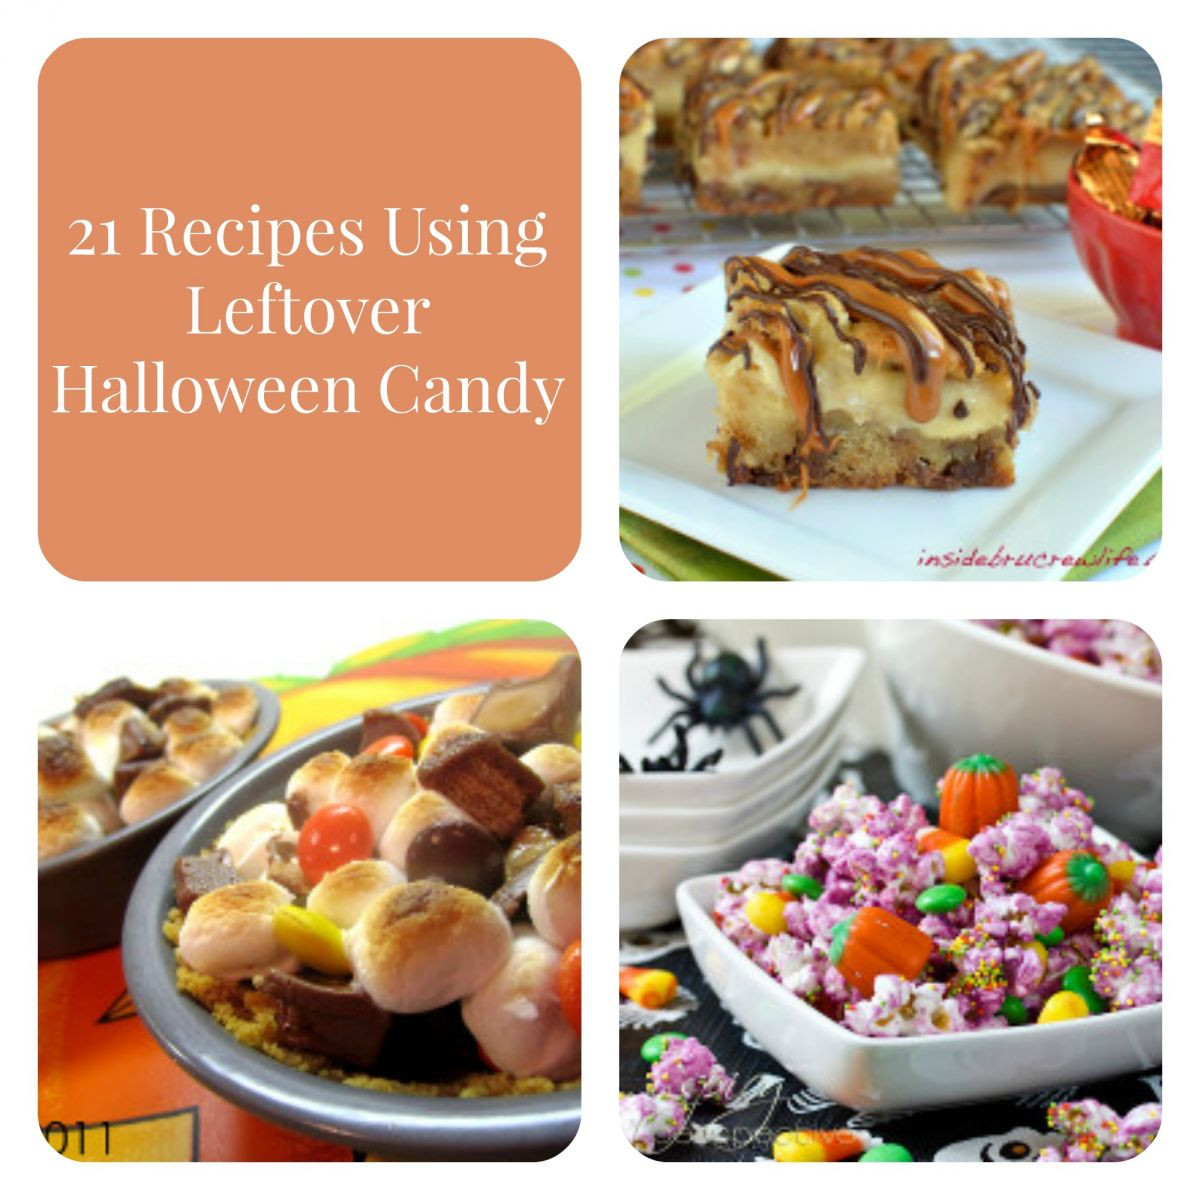 Leftover Halloween Candy Recipes
 21 Recipes Using Leftover Halloween Candy